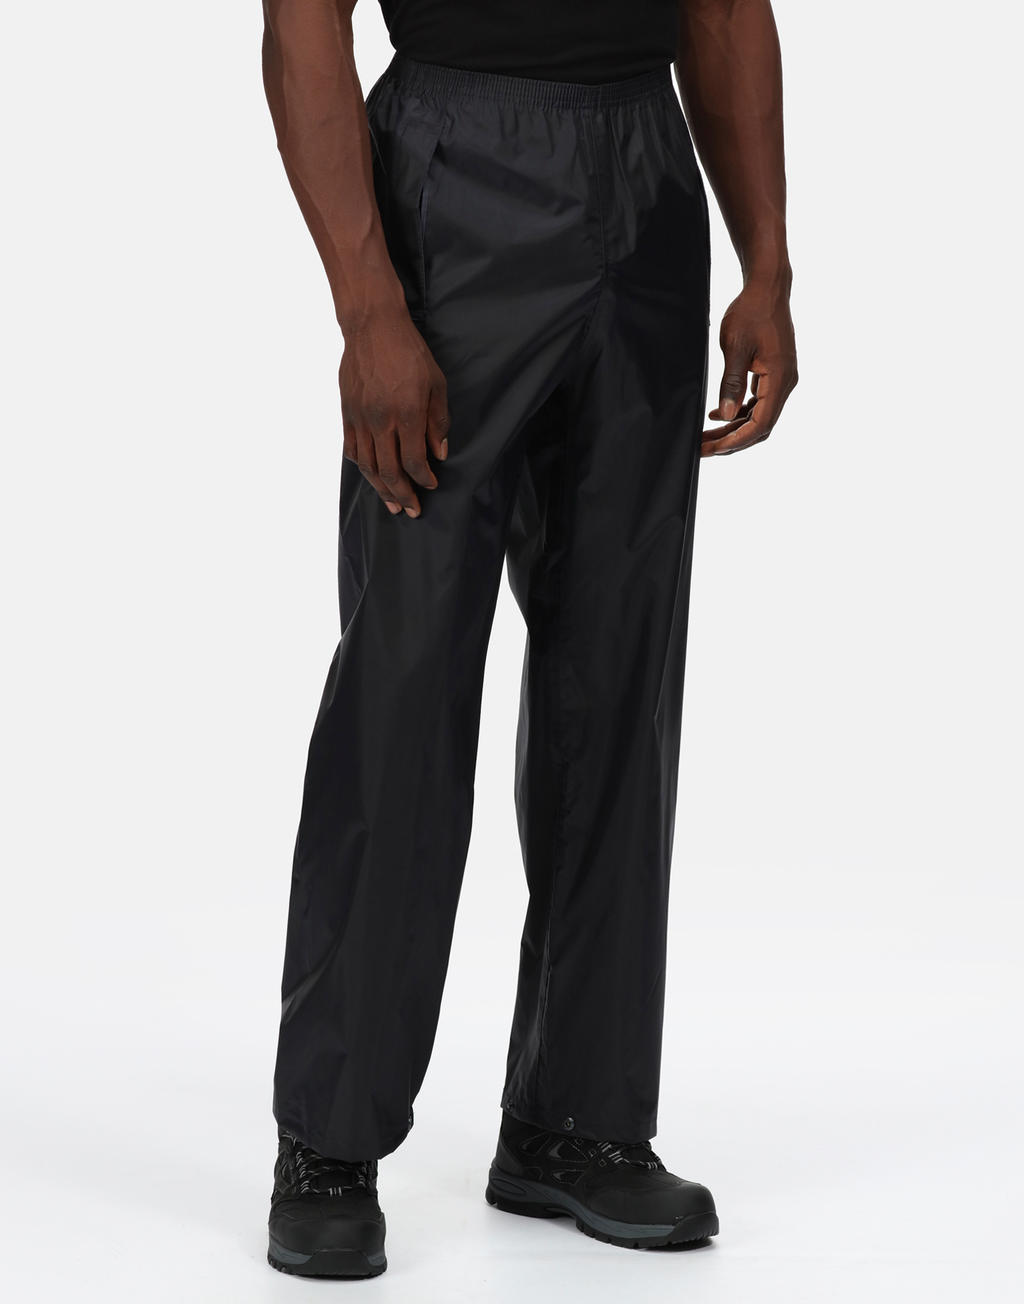  Stormbreak Overtrousers in Farbe Black